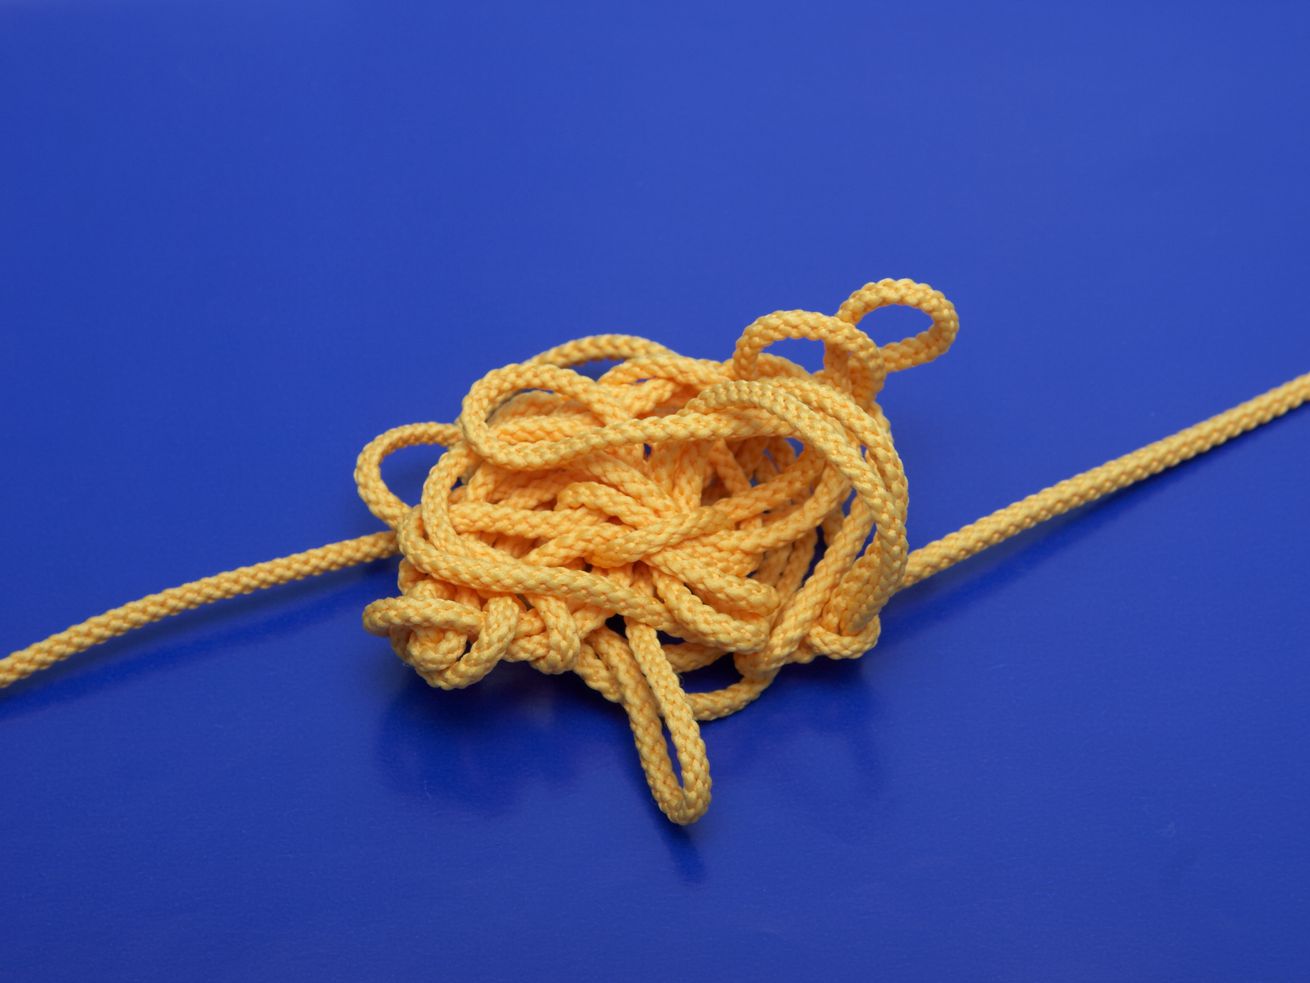 A tangled bit of thin yellow rope, with one end leading off to the left and the other end off to the right.